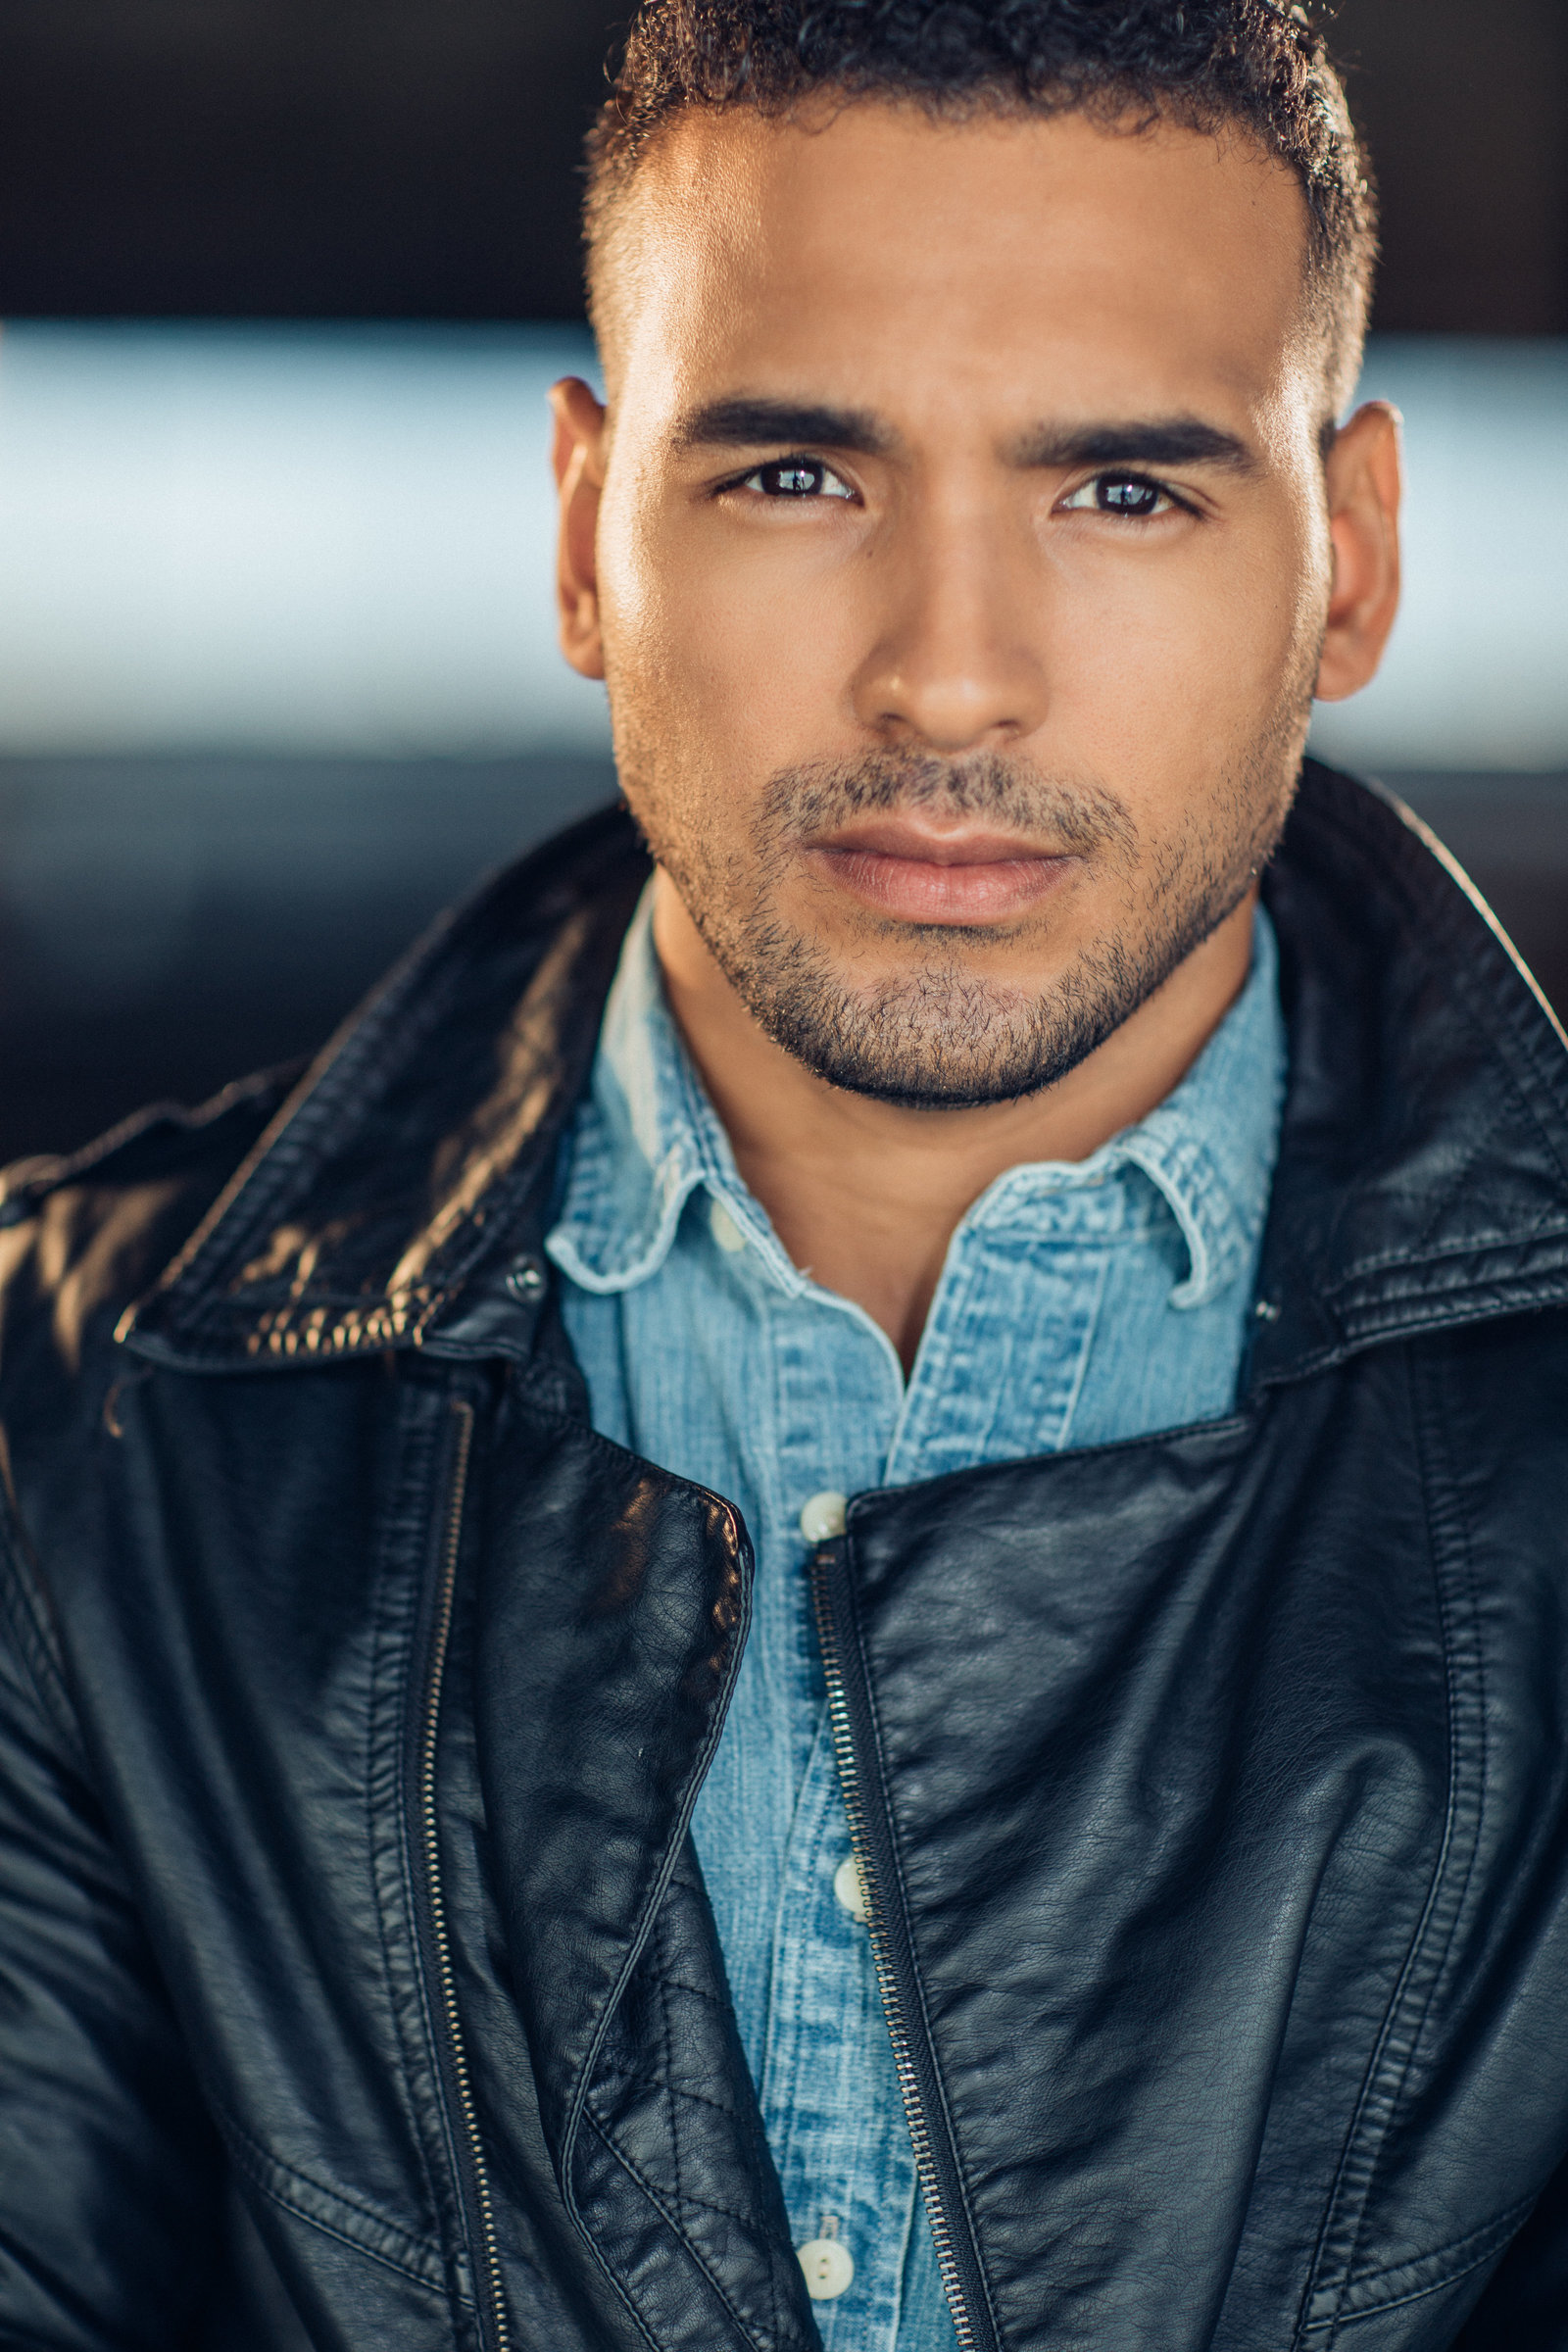 Headshot Photo Of Young Man In Black Leather Jacket And Inner Blue Denim Polo